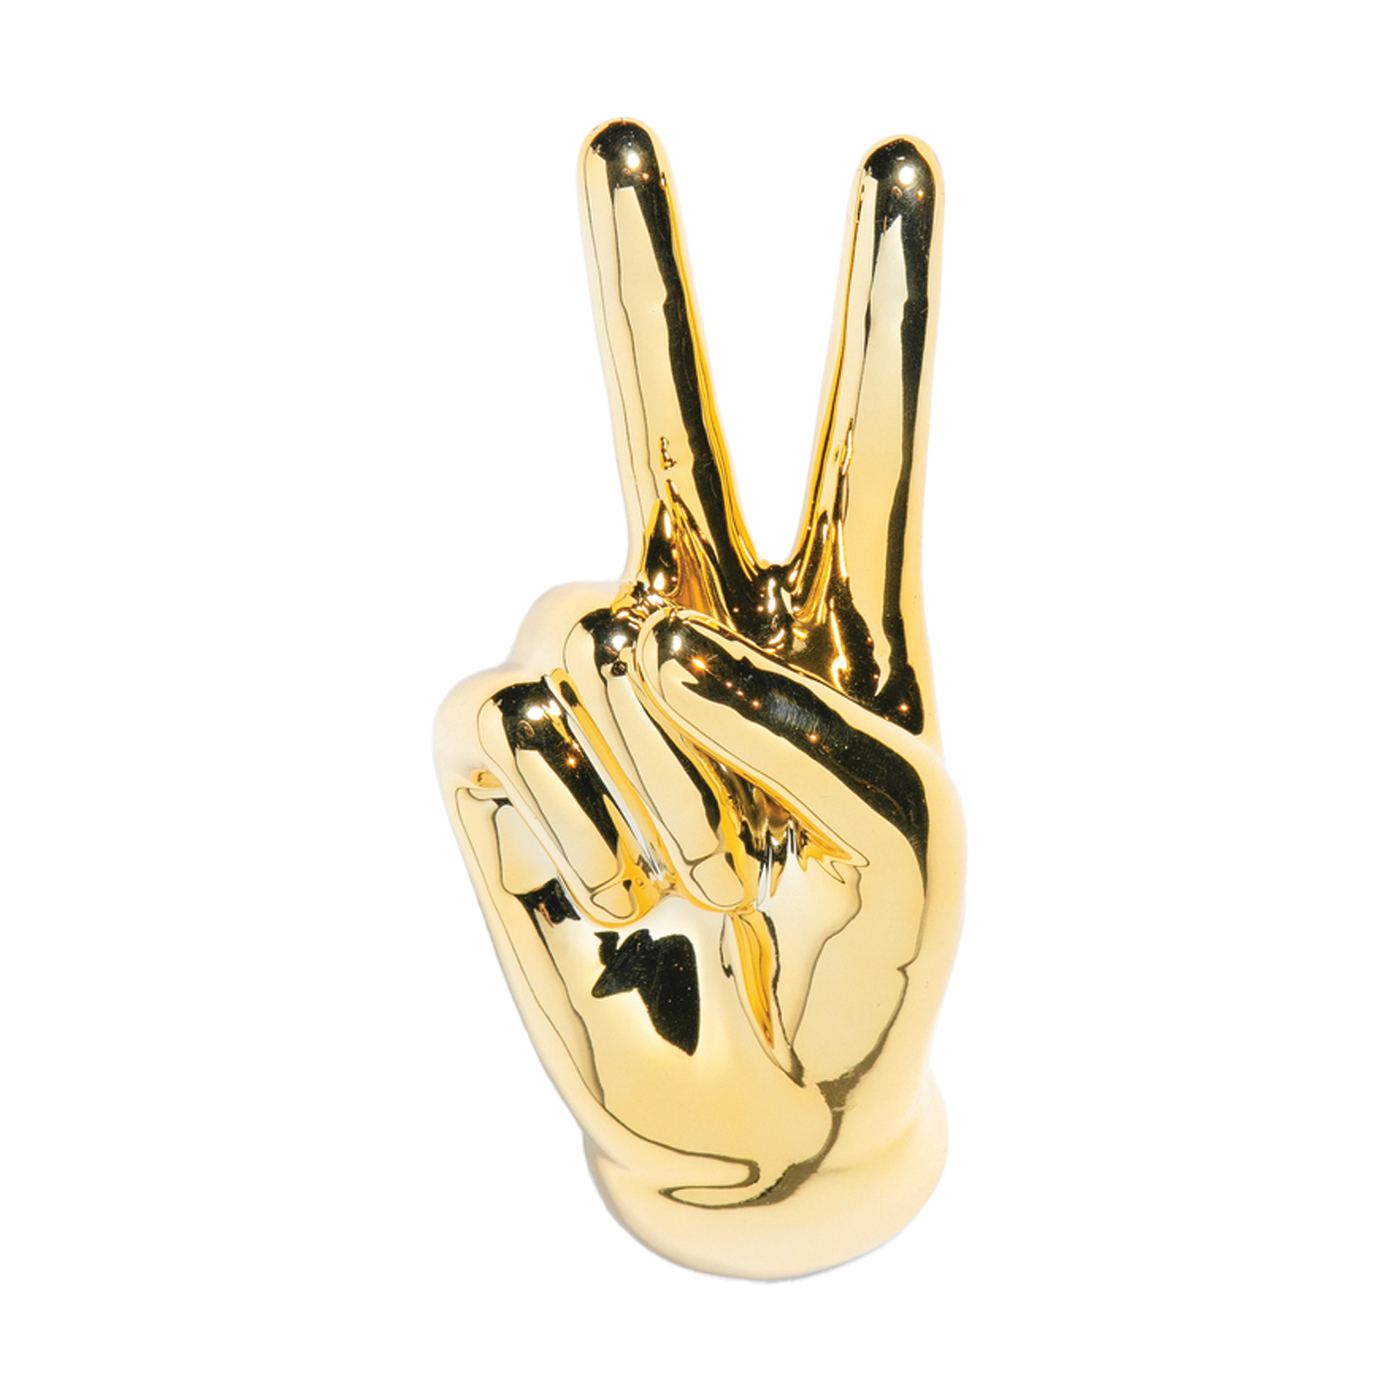 Wall Mount: Gold Peace Sign 9" Tall